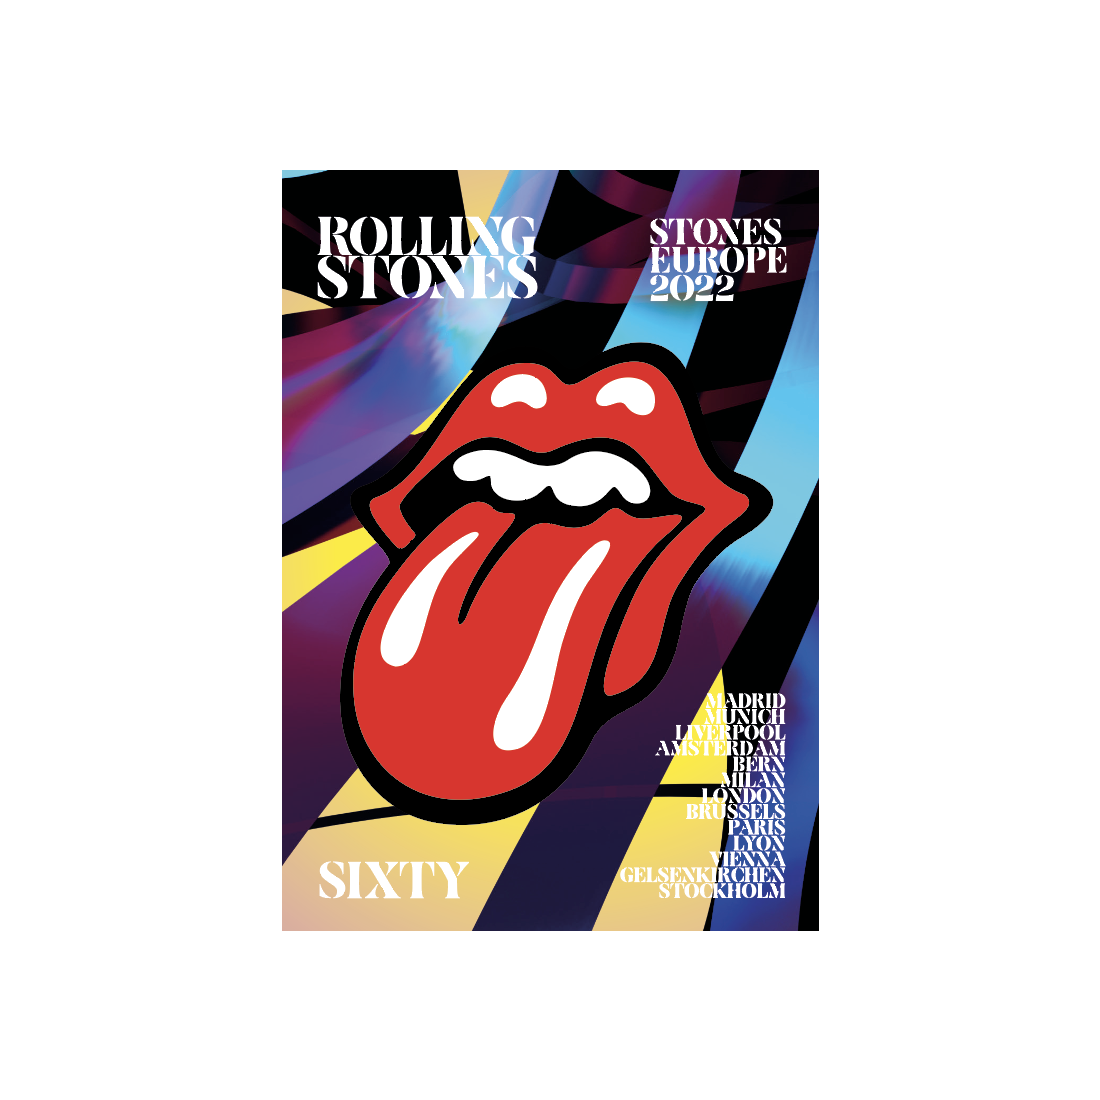 The Rolling Stones - Sixty Anniversary Tour Admat Lithographic